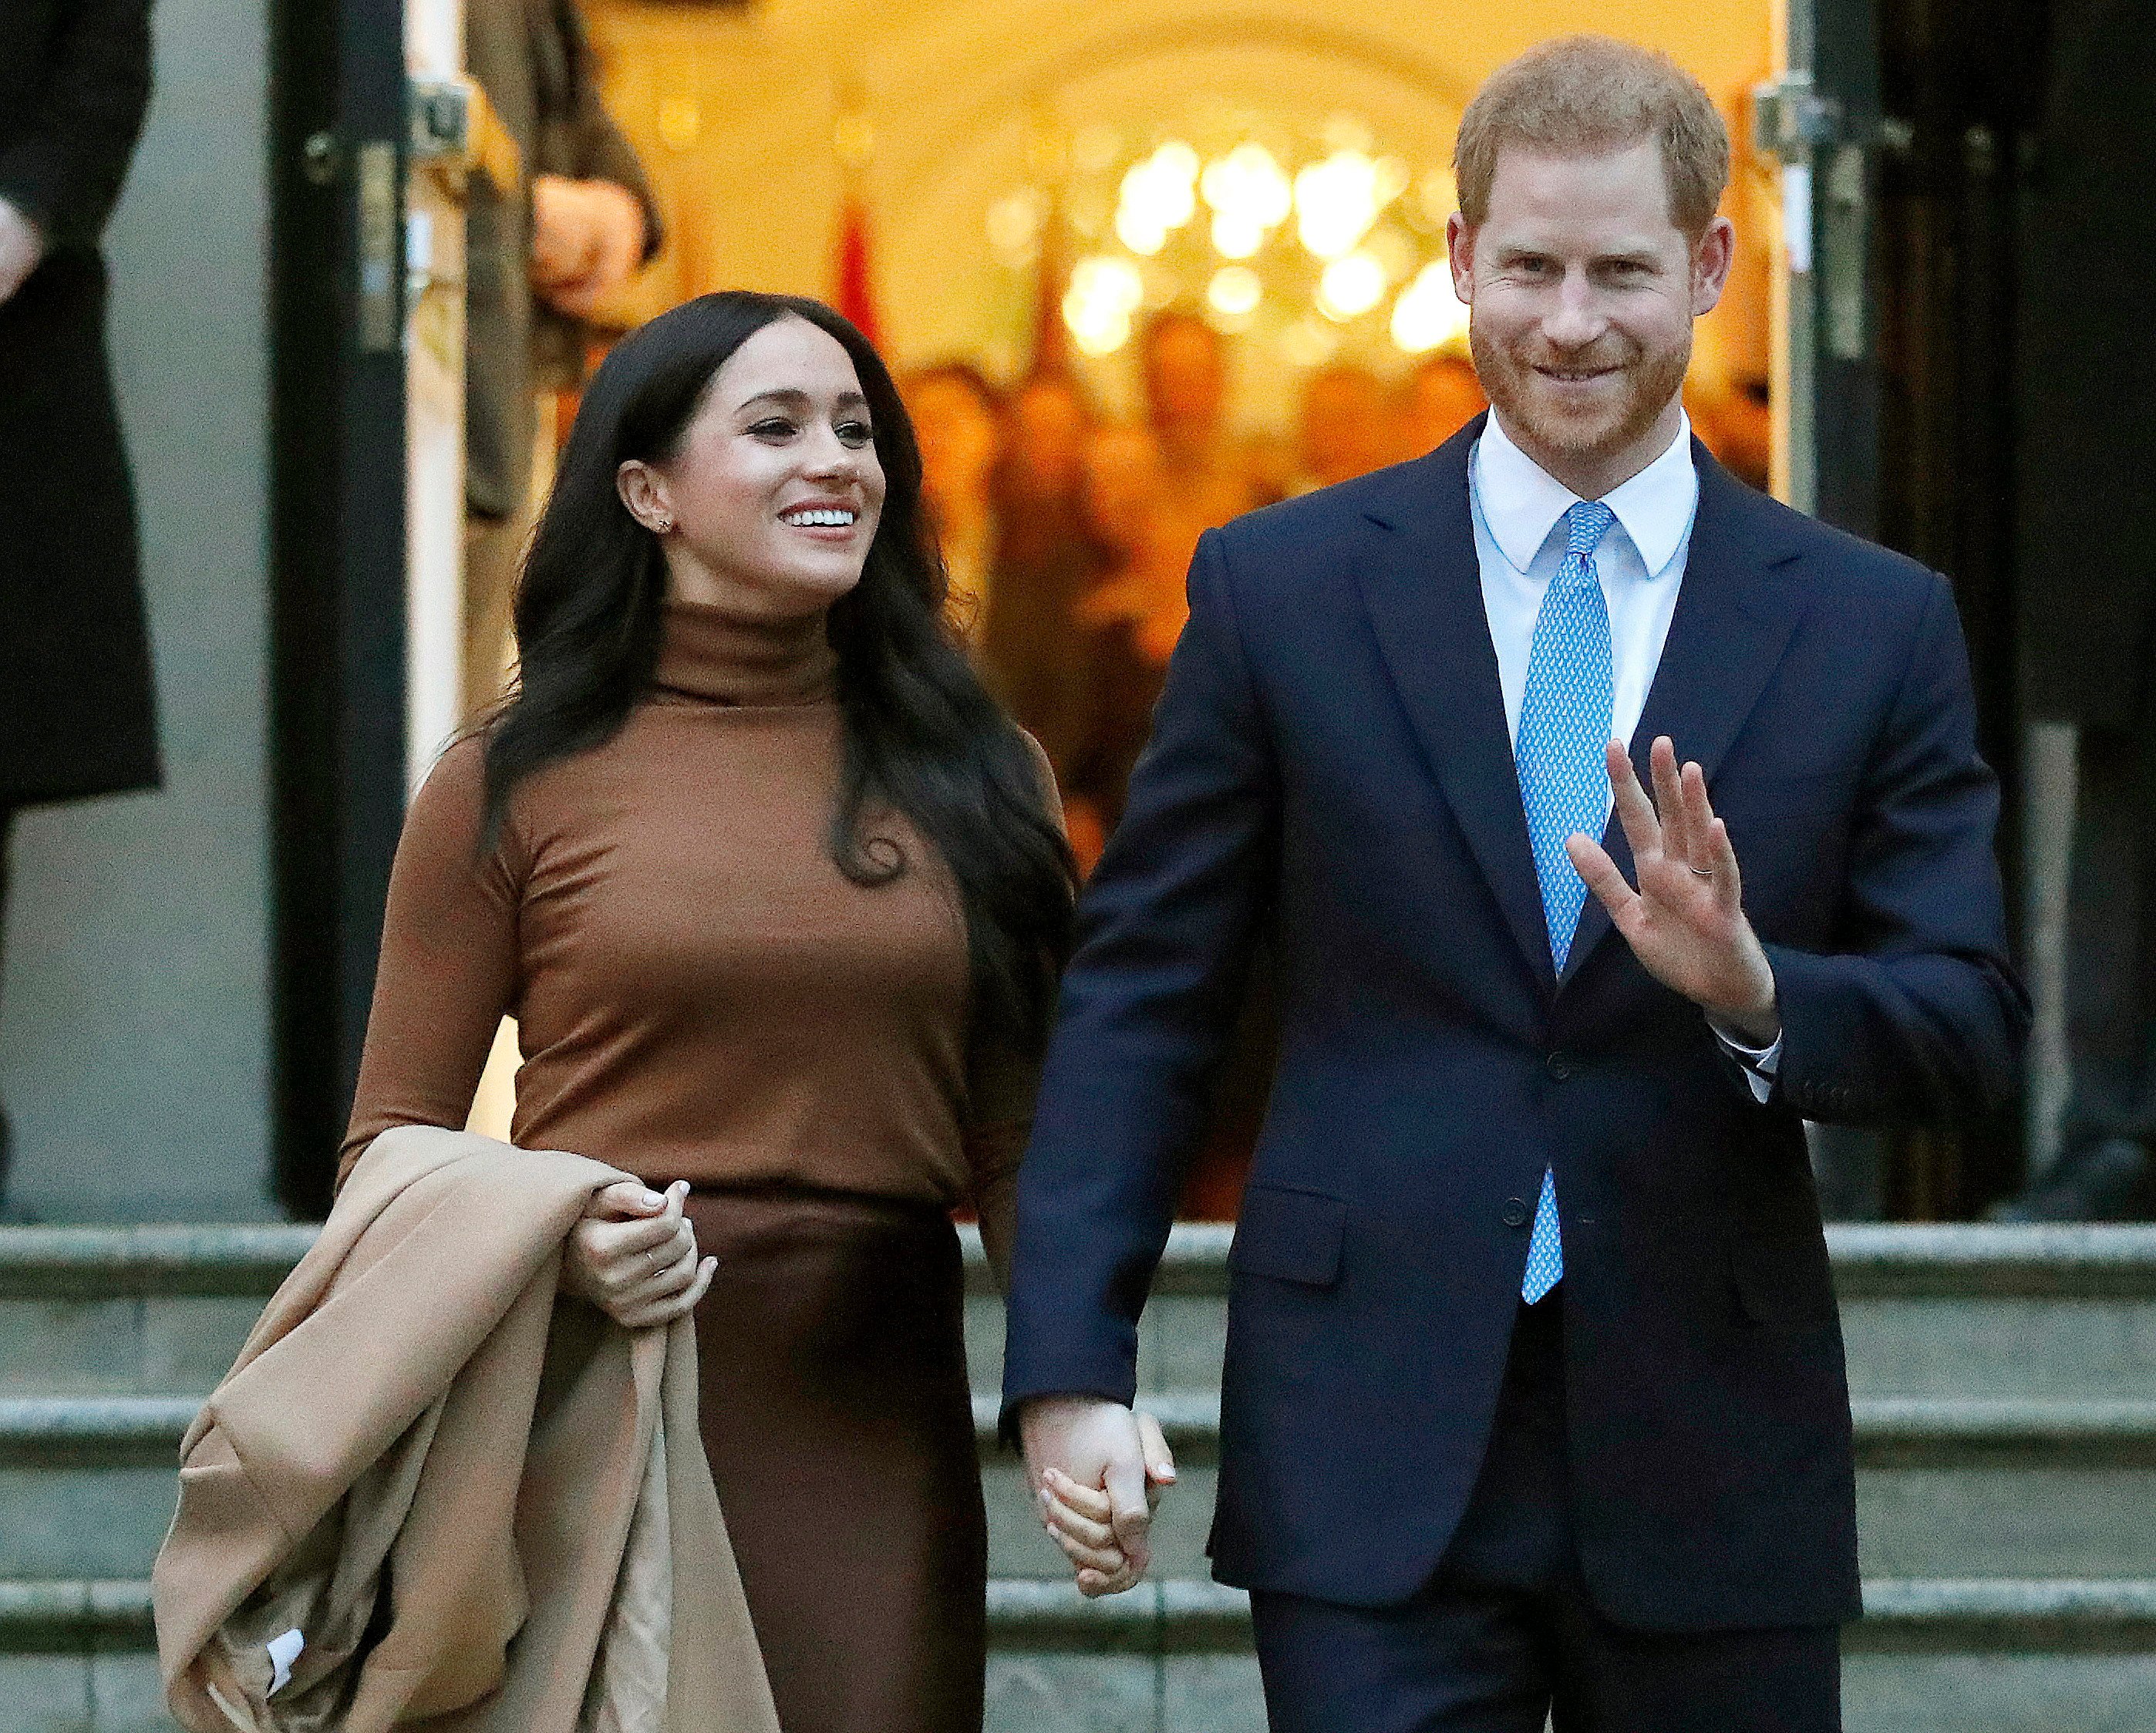 Britain’s Prince Harry and Meghan, Duchess of Sussex, are foodies who love dining out in Los Angeles, where they currently live. Photo: AP Photo